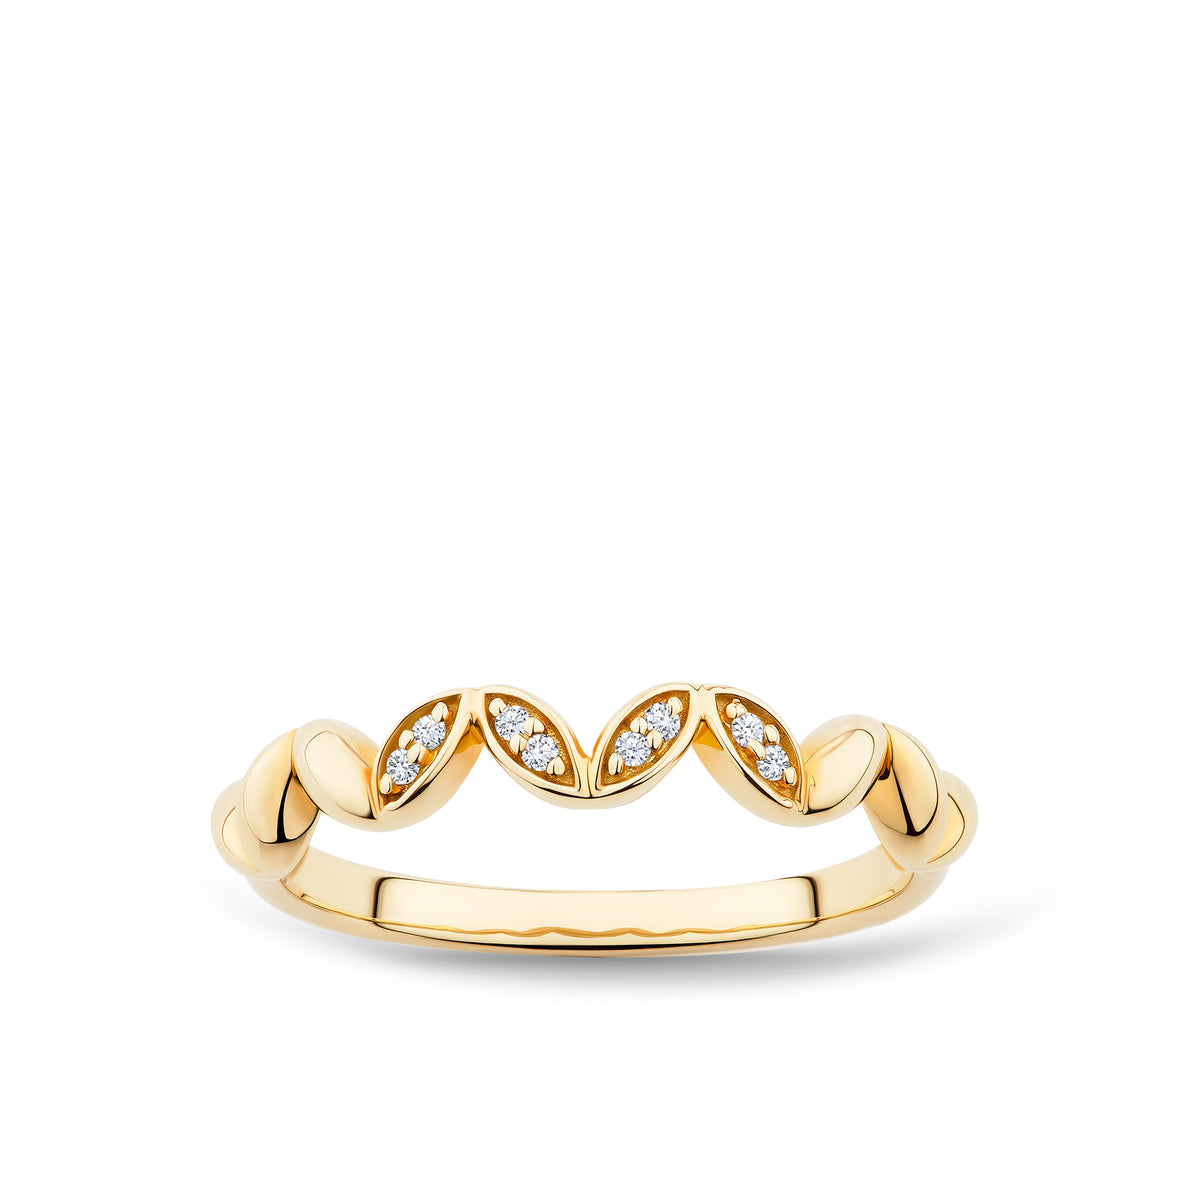 Helia™ Diamond Vine Ring in 9ct Recycled Gold